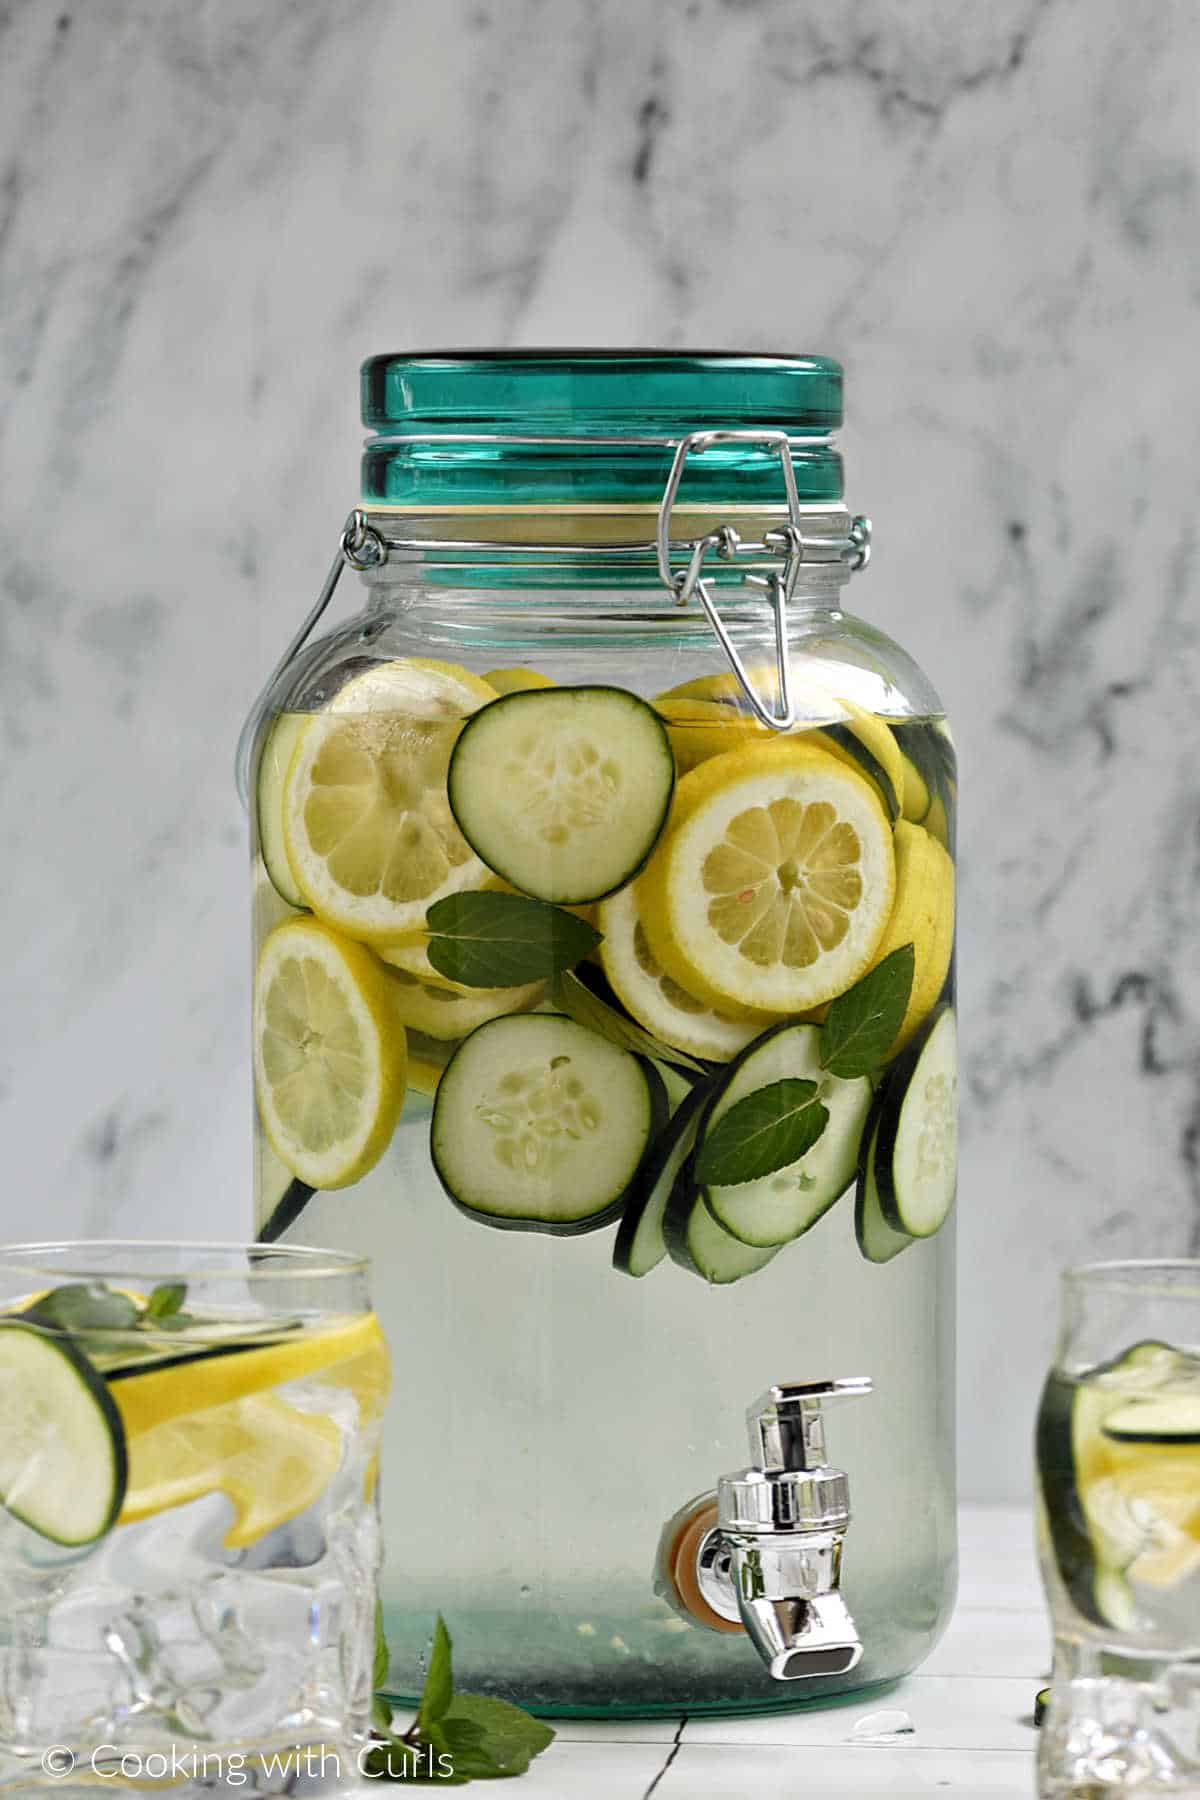 A gallon canister filled with lemon and cucumber slices, mint leaves, and water.